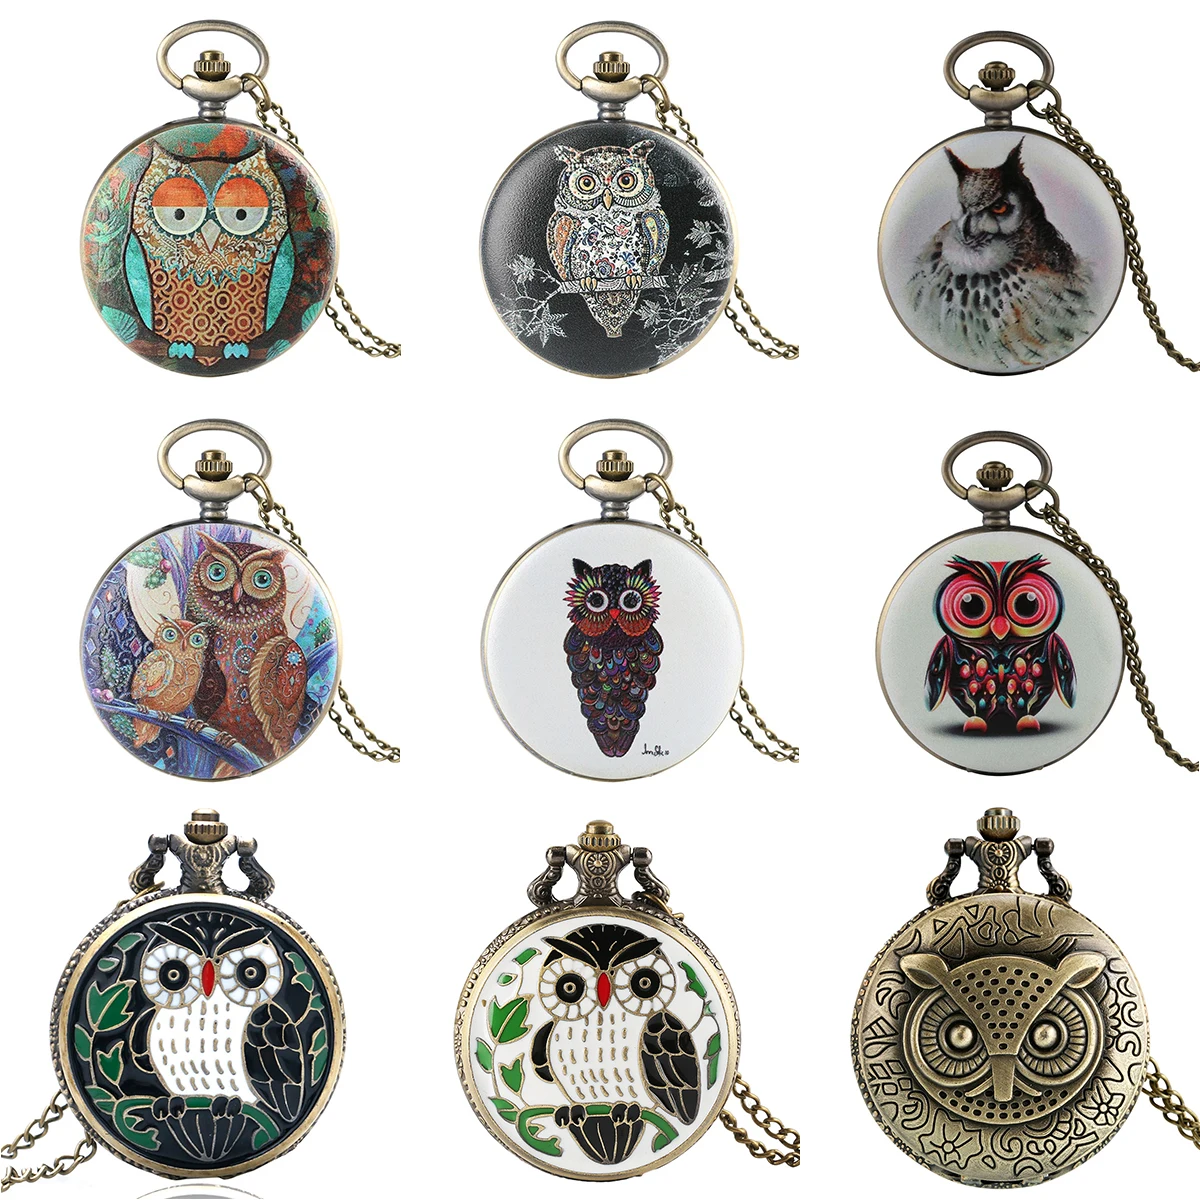 

Vintage Stylish Owl Display Full Hunter Quartz Necklace Watch Arabic Numerals Dial Antique Lovely Pendant Pocket Timepiece Gift